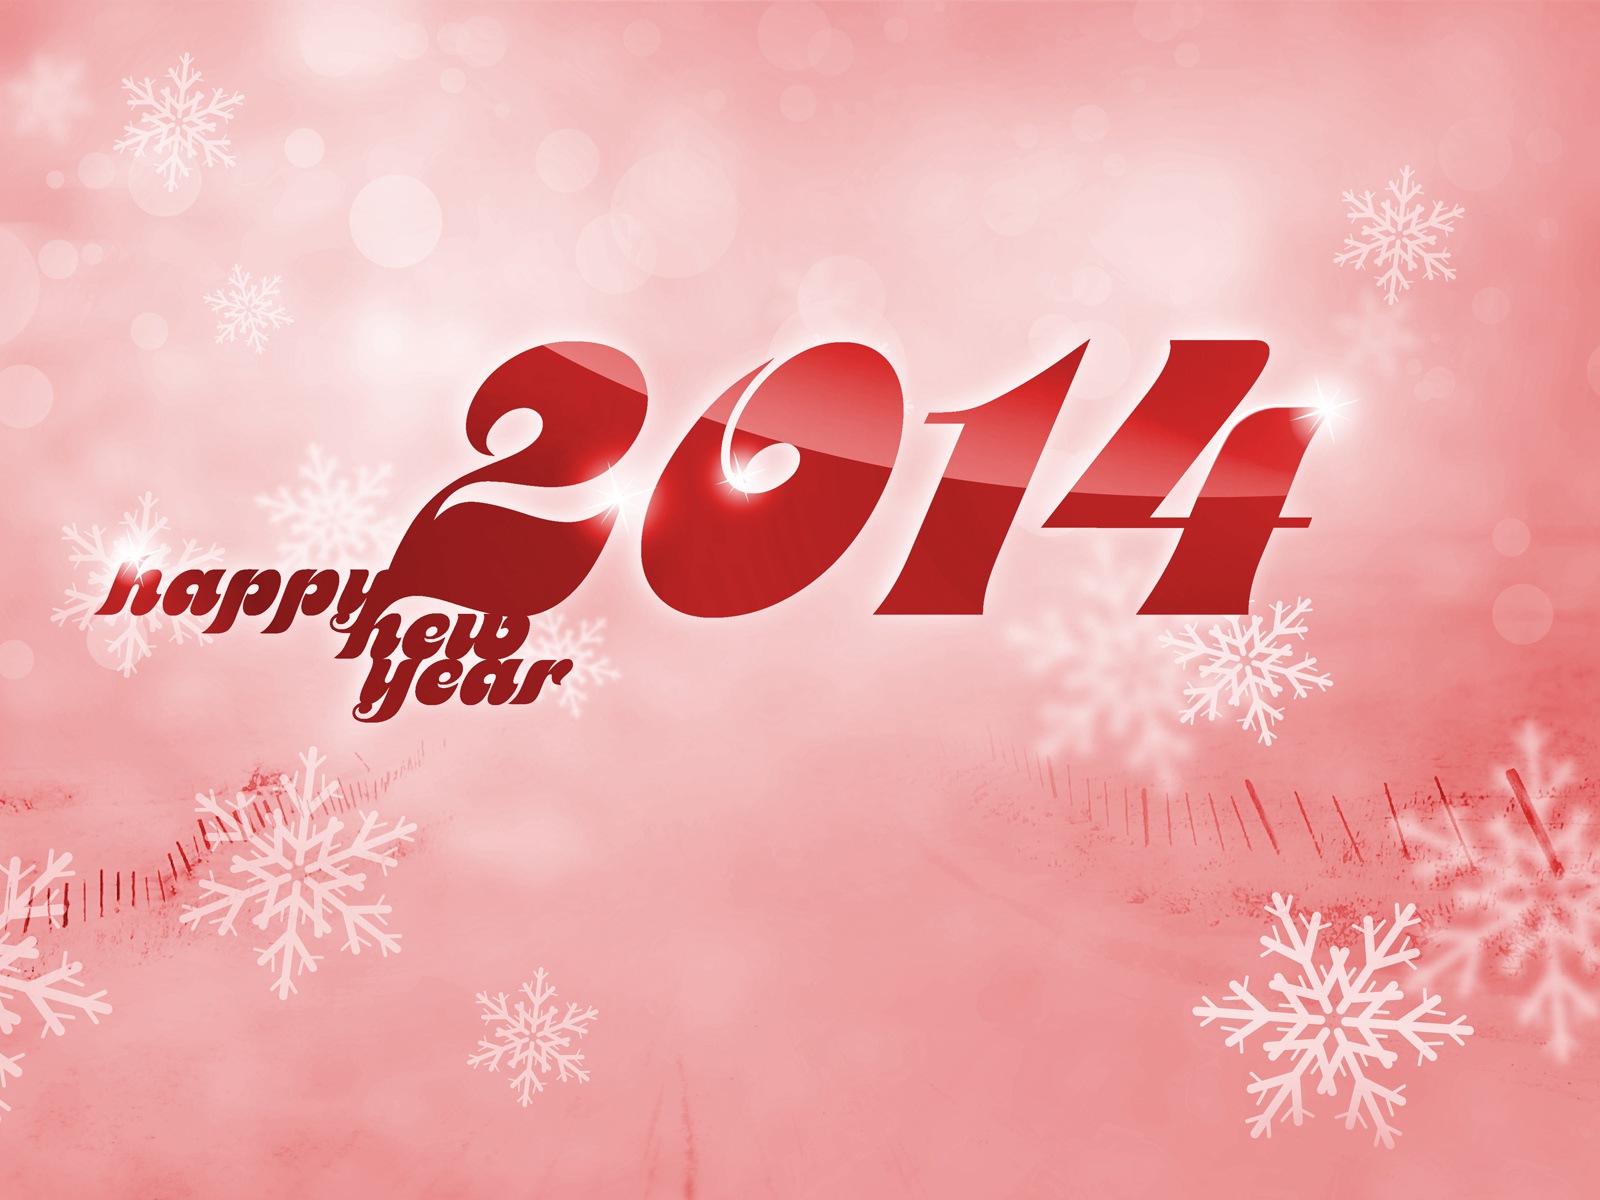 2014 New Year Theme HD Wallpapers (1) #12 - 1600x1200